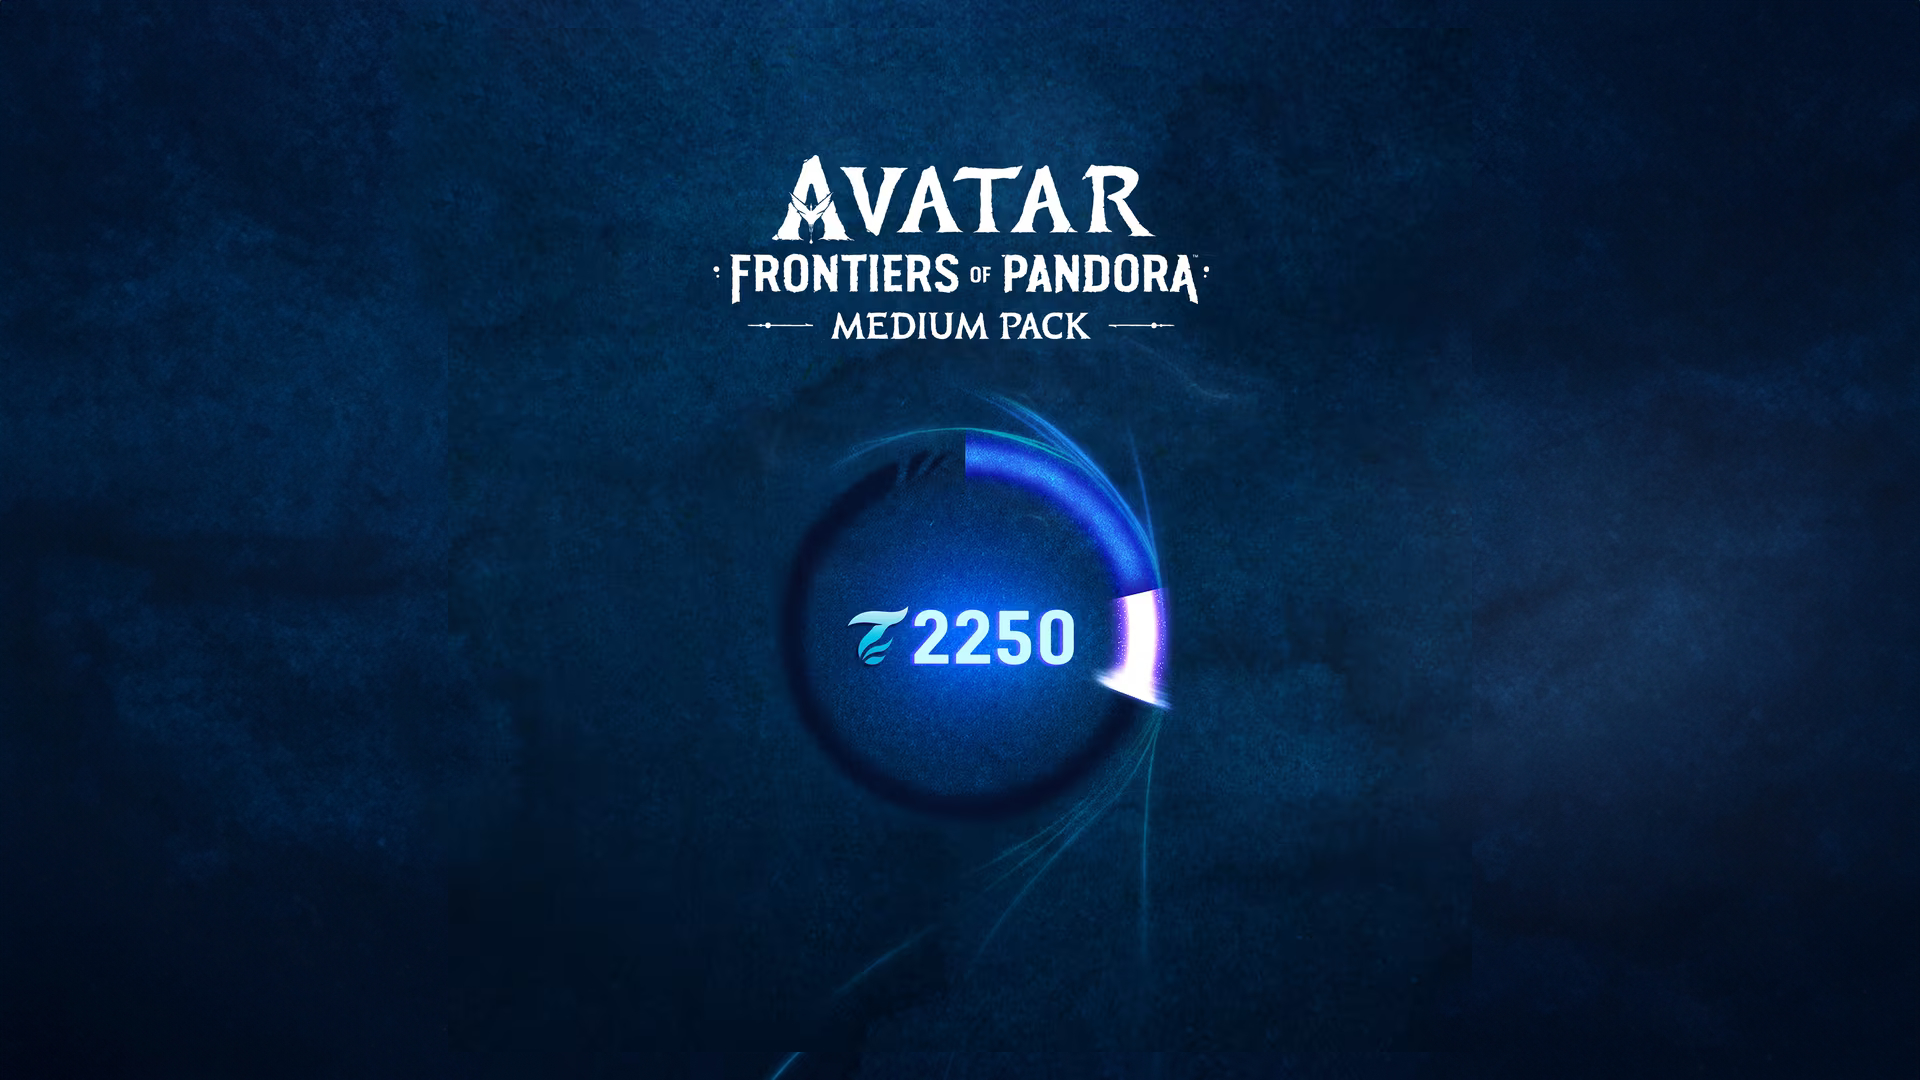 Avatar: Frontiers of Pandora - 2250 VC Pack Xbox Series X|S CD Key 20.47 usd